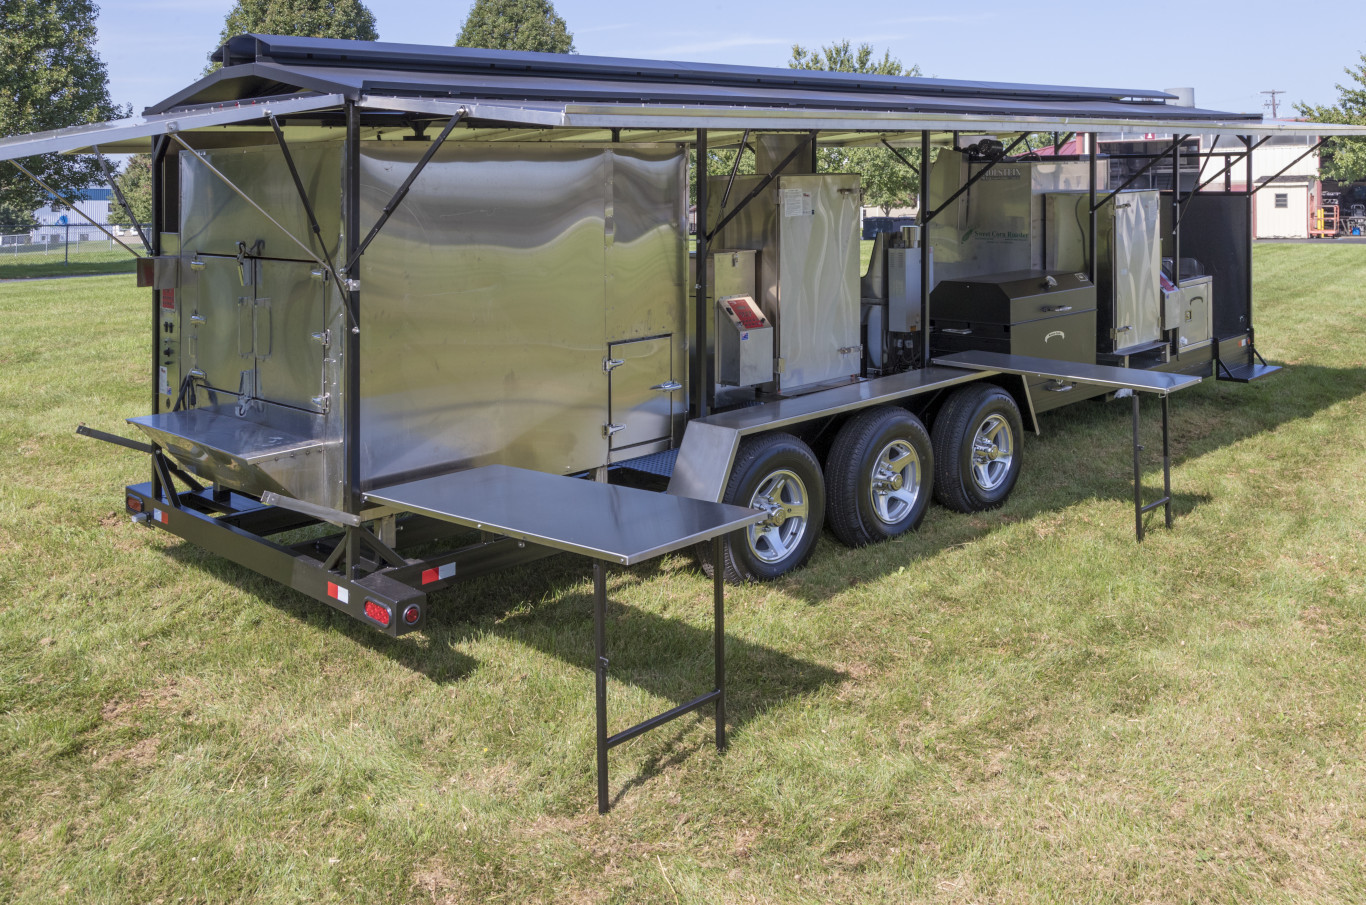 Custom Barbecue Trailer with roof raised and folding stainless steel tables deployed as an example of custom barbecue trailers